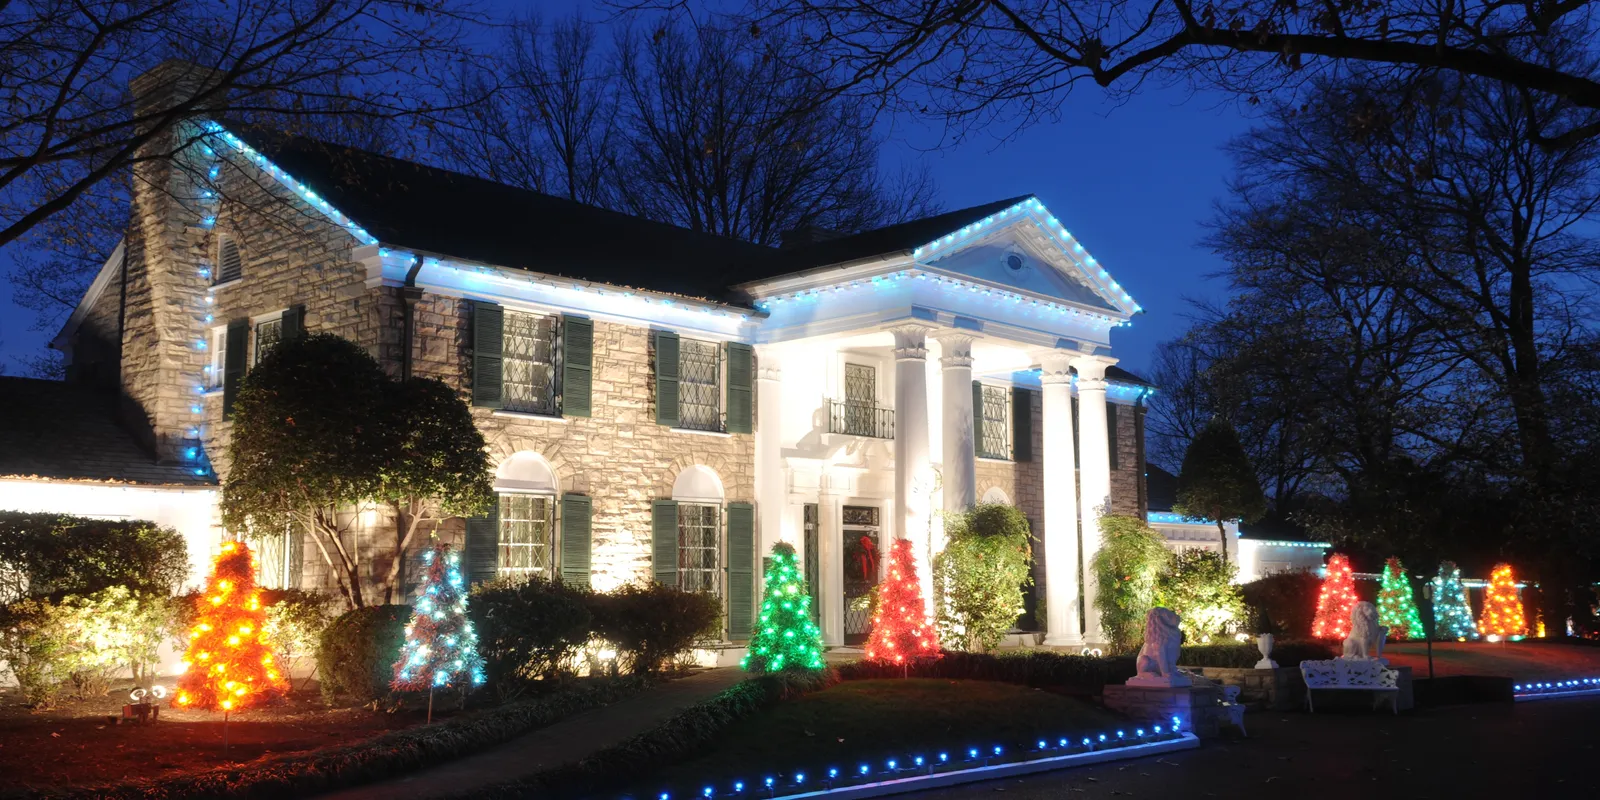 NBC Celebrates "Christmas at Graceland" This Holiday Season with All-New Special